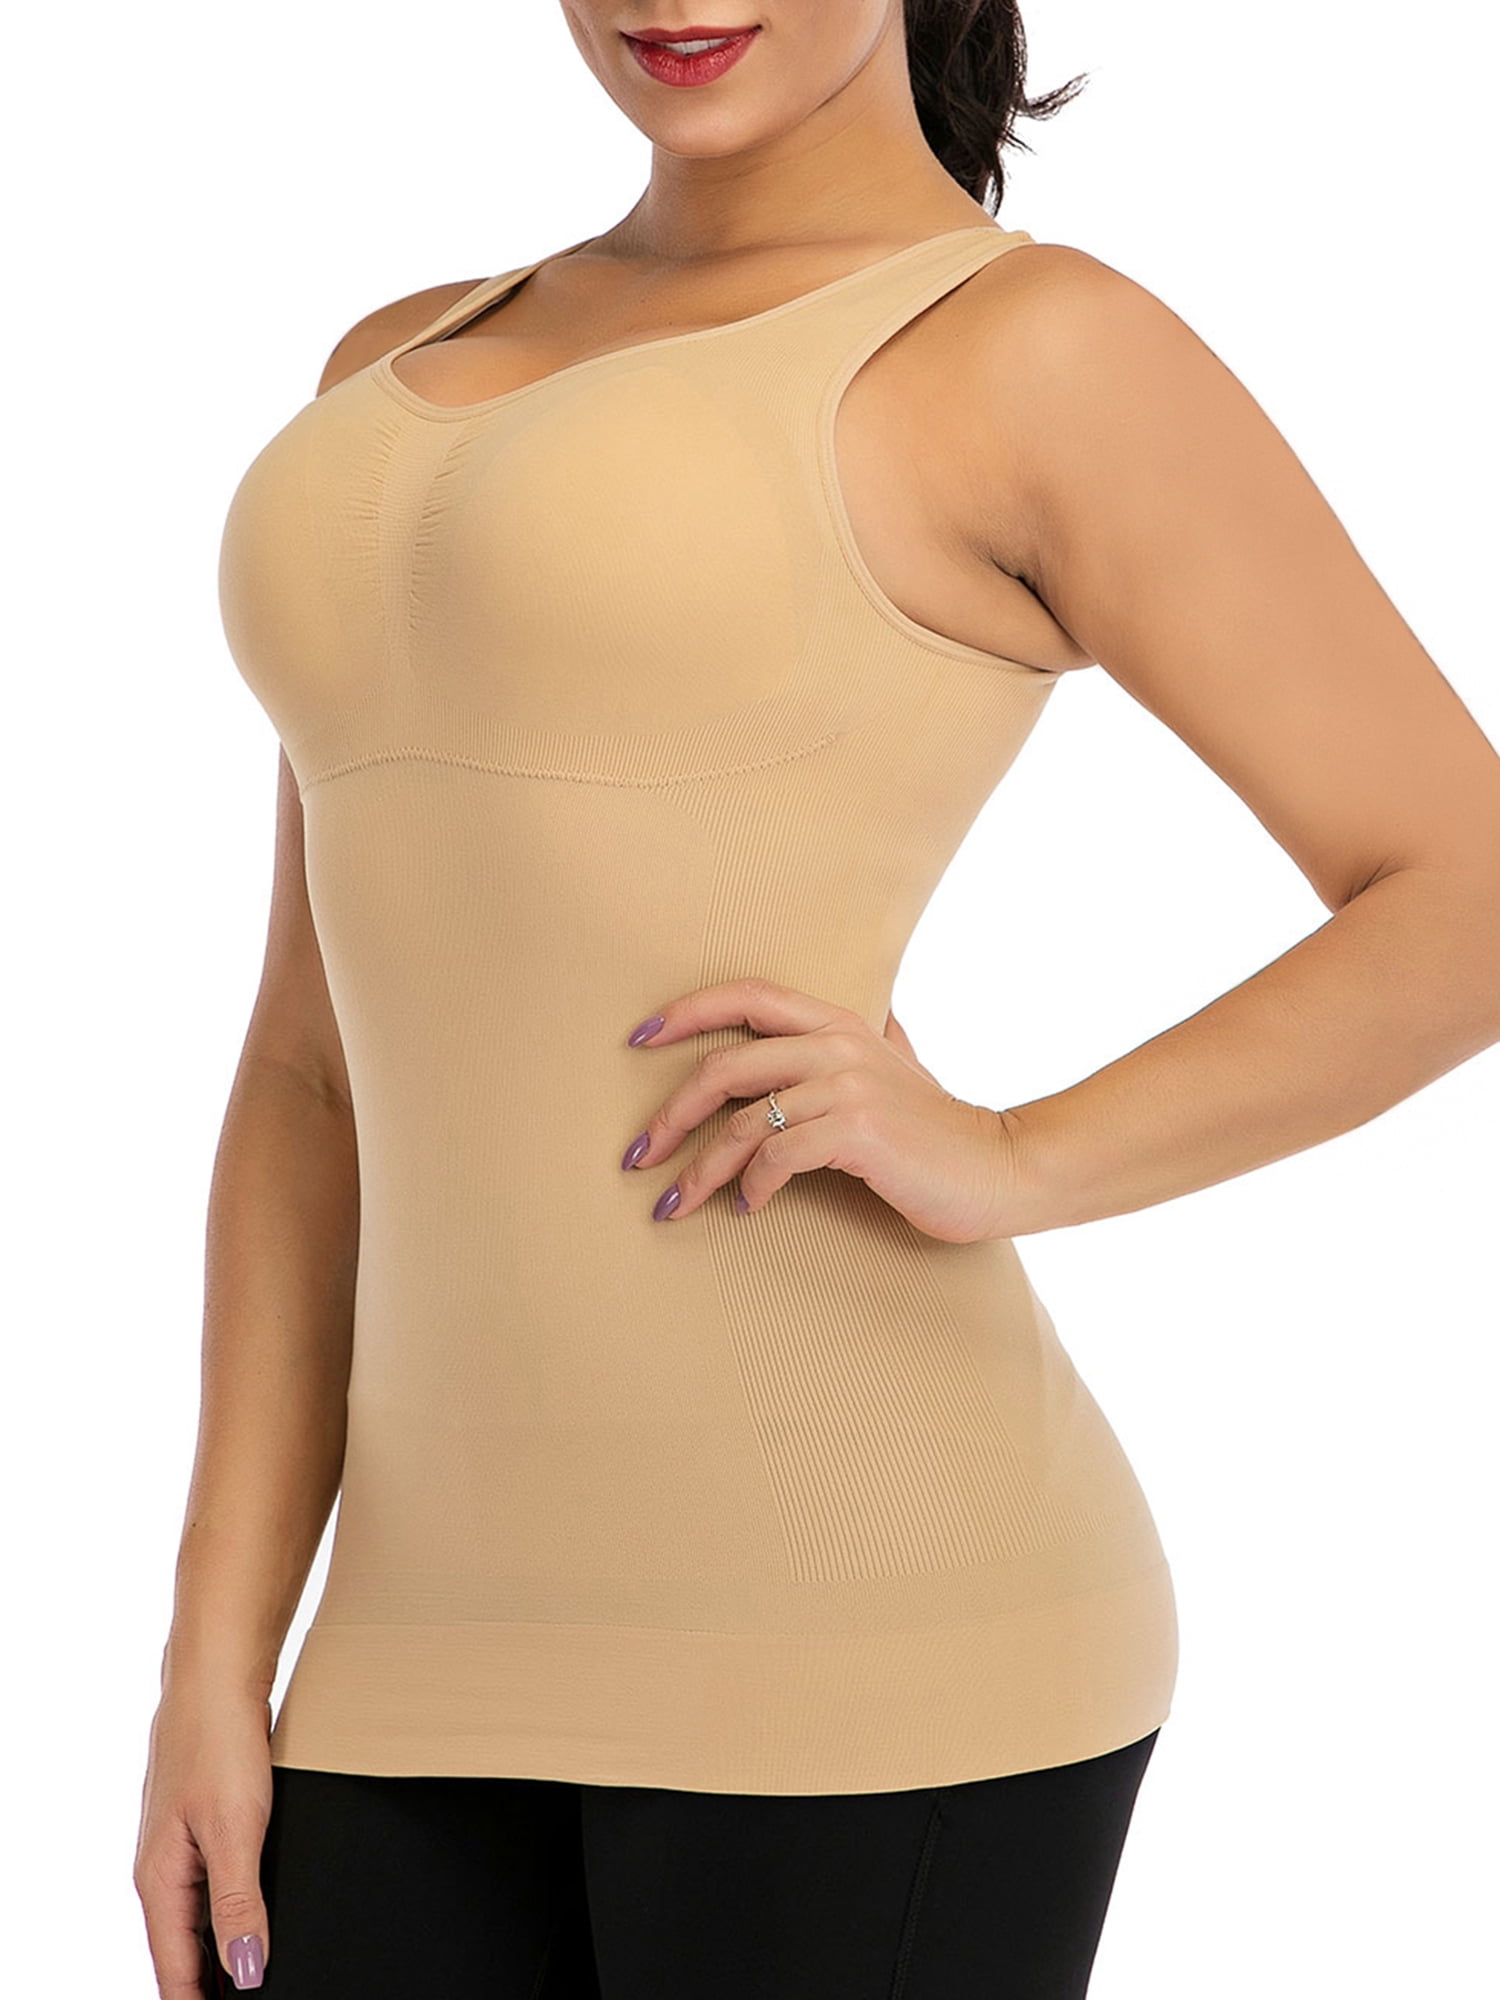 Your Contour T-Silhouette Seamless Shapewear Camisole - Slimming Cami Shaper